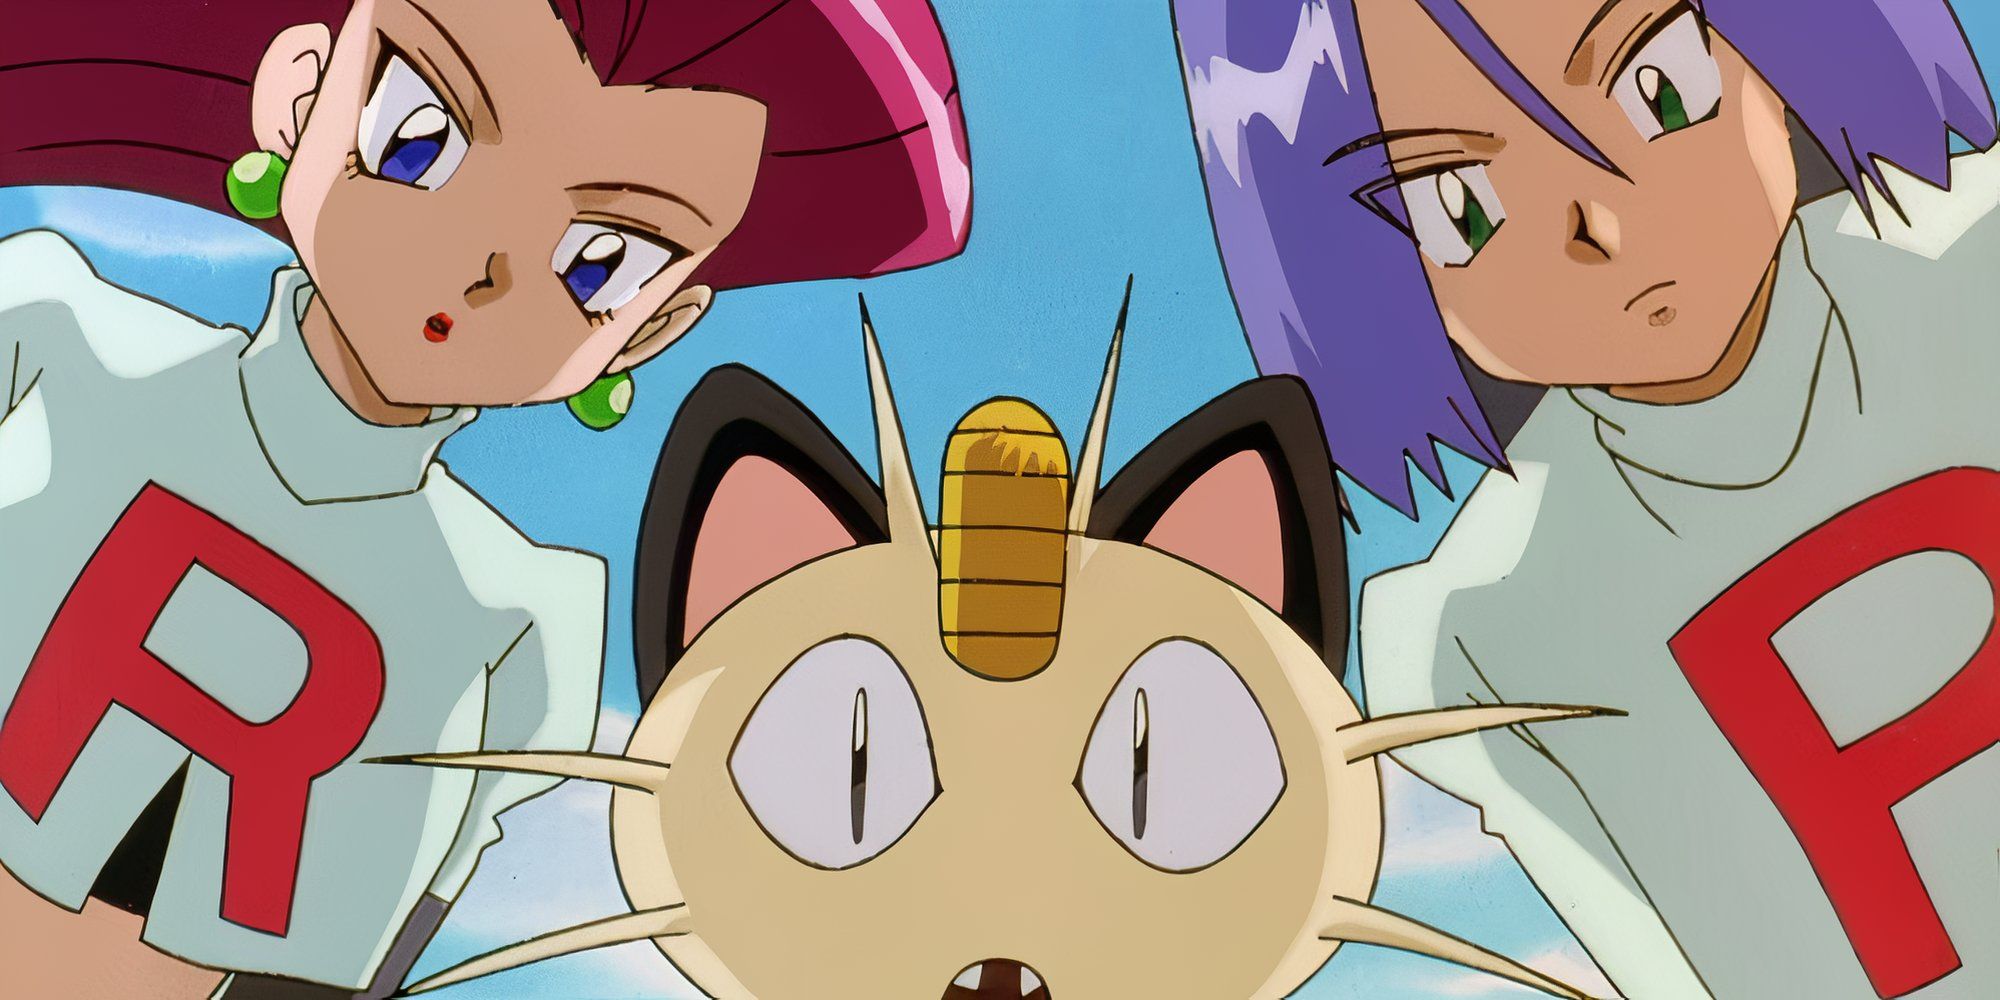 Jesse, Meowth, and James in the Pokemon anime